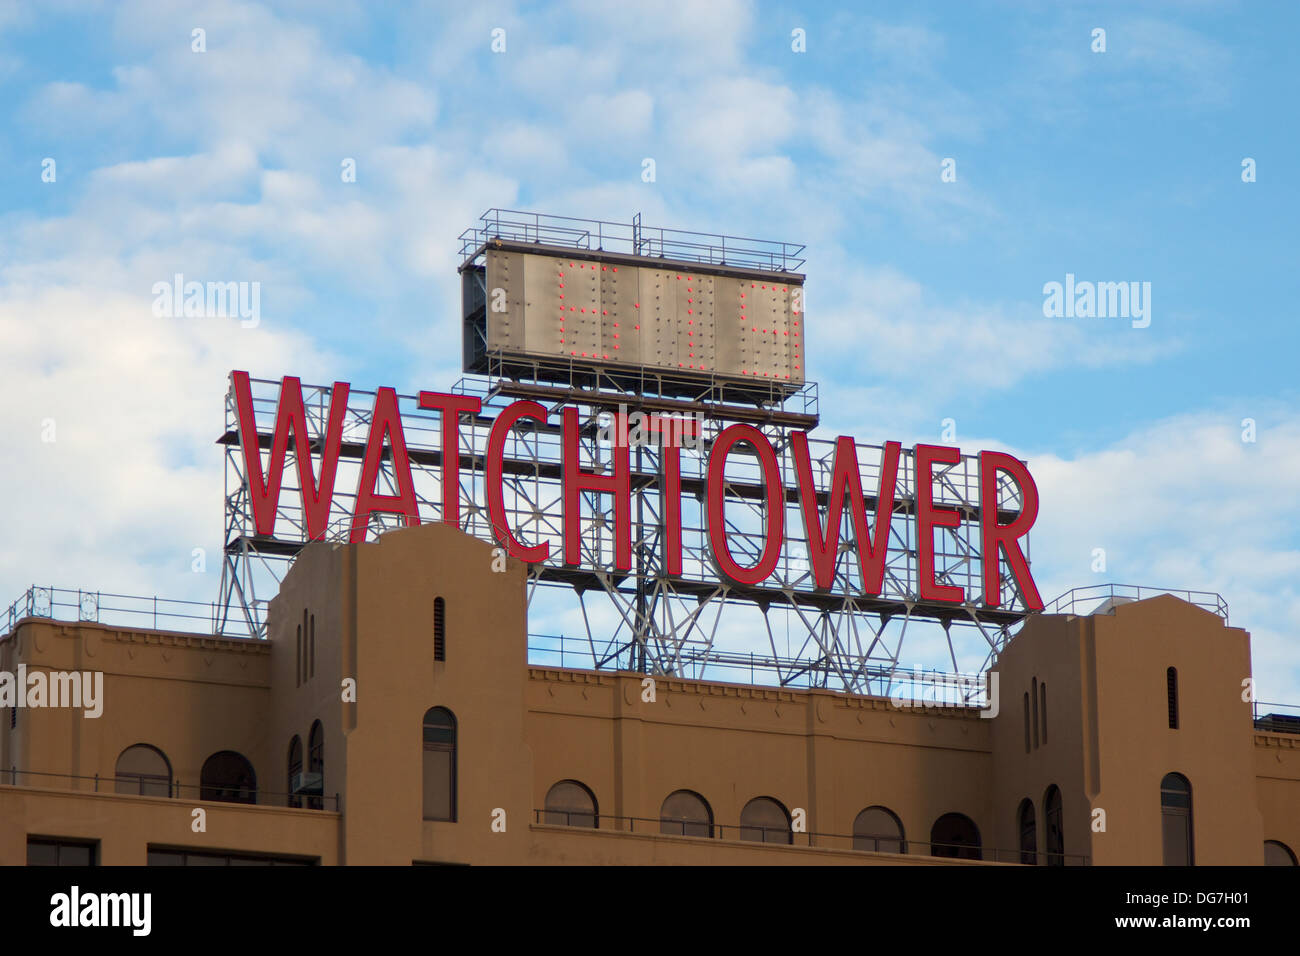 Facade with sign of The Watchtower building in the Dumbo area of Brooklyn, NY, USA on September 8, 2013. Stock Photo